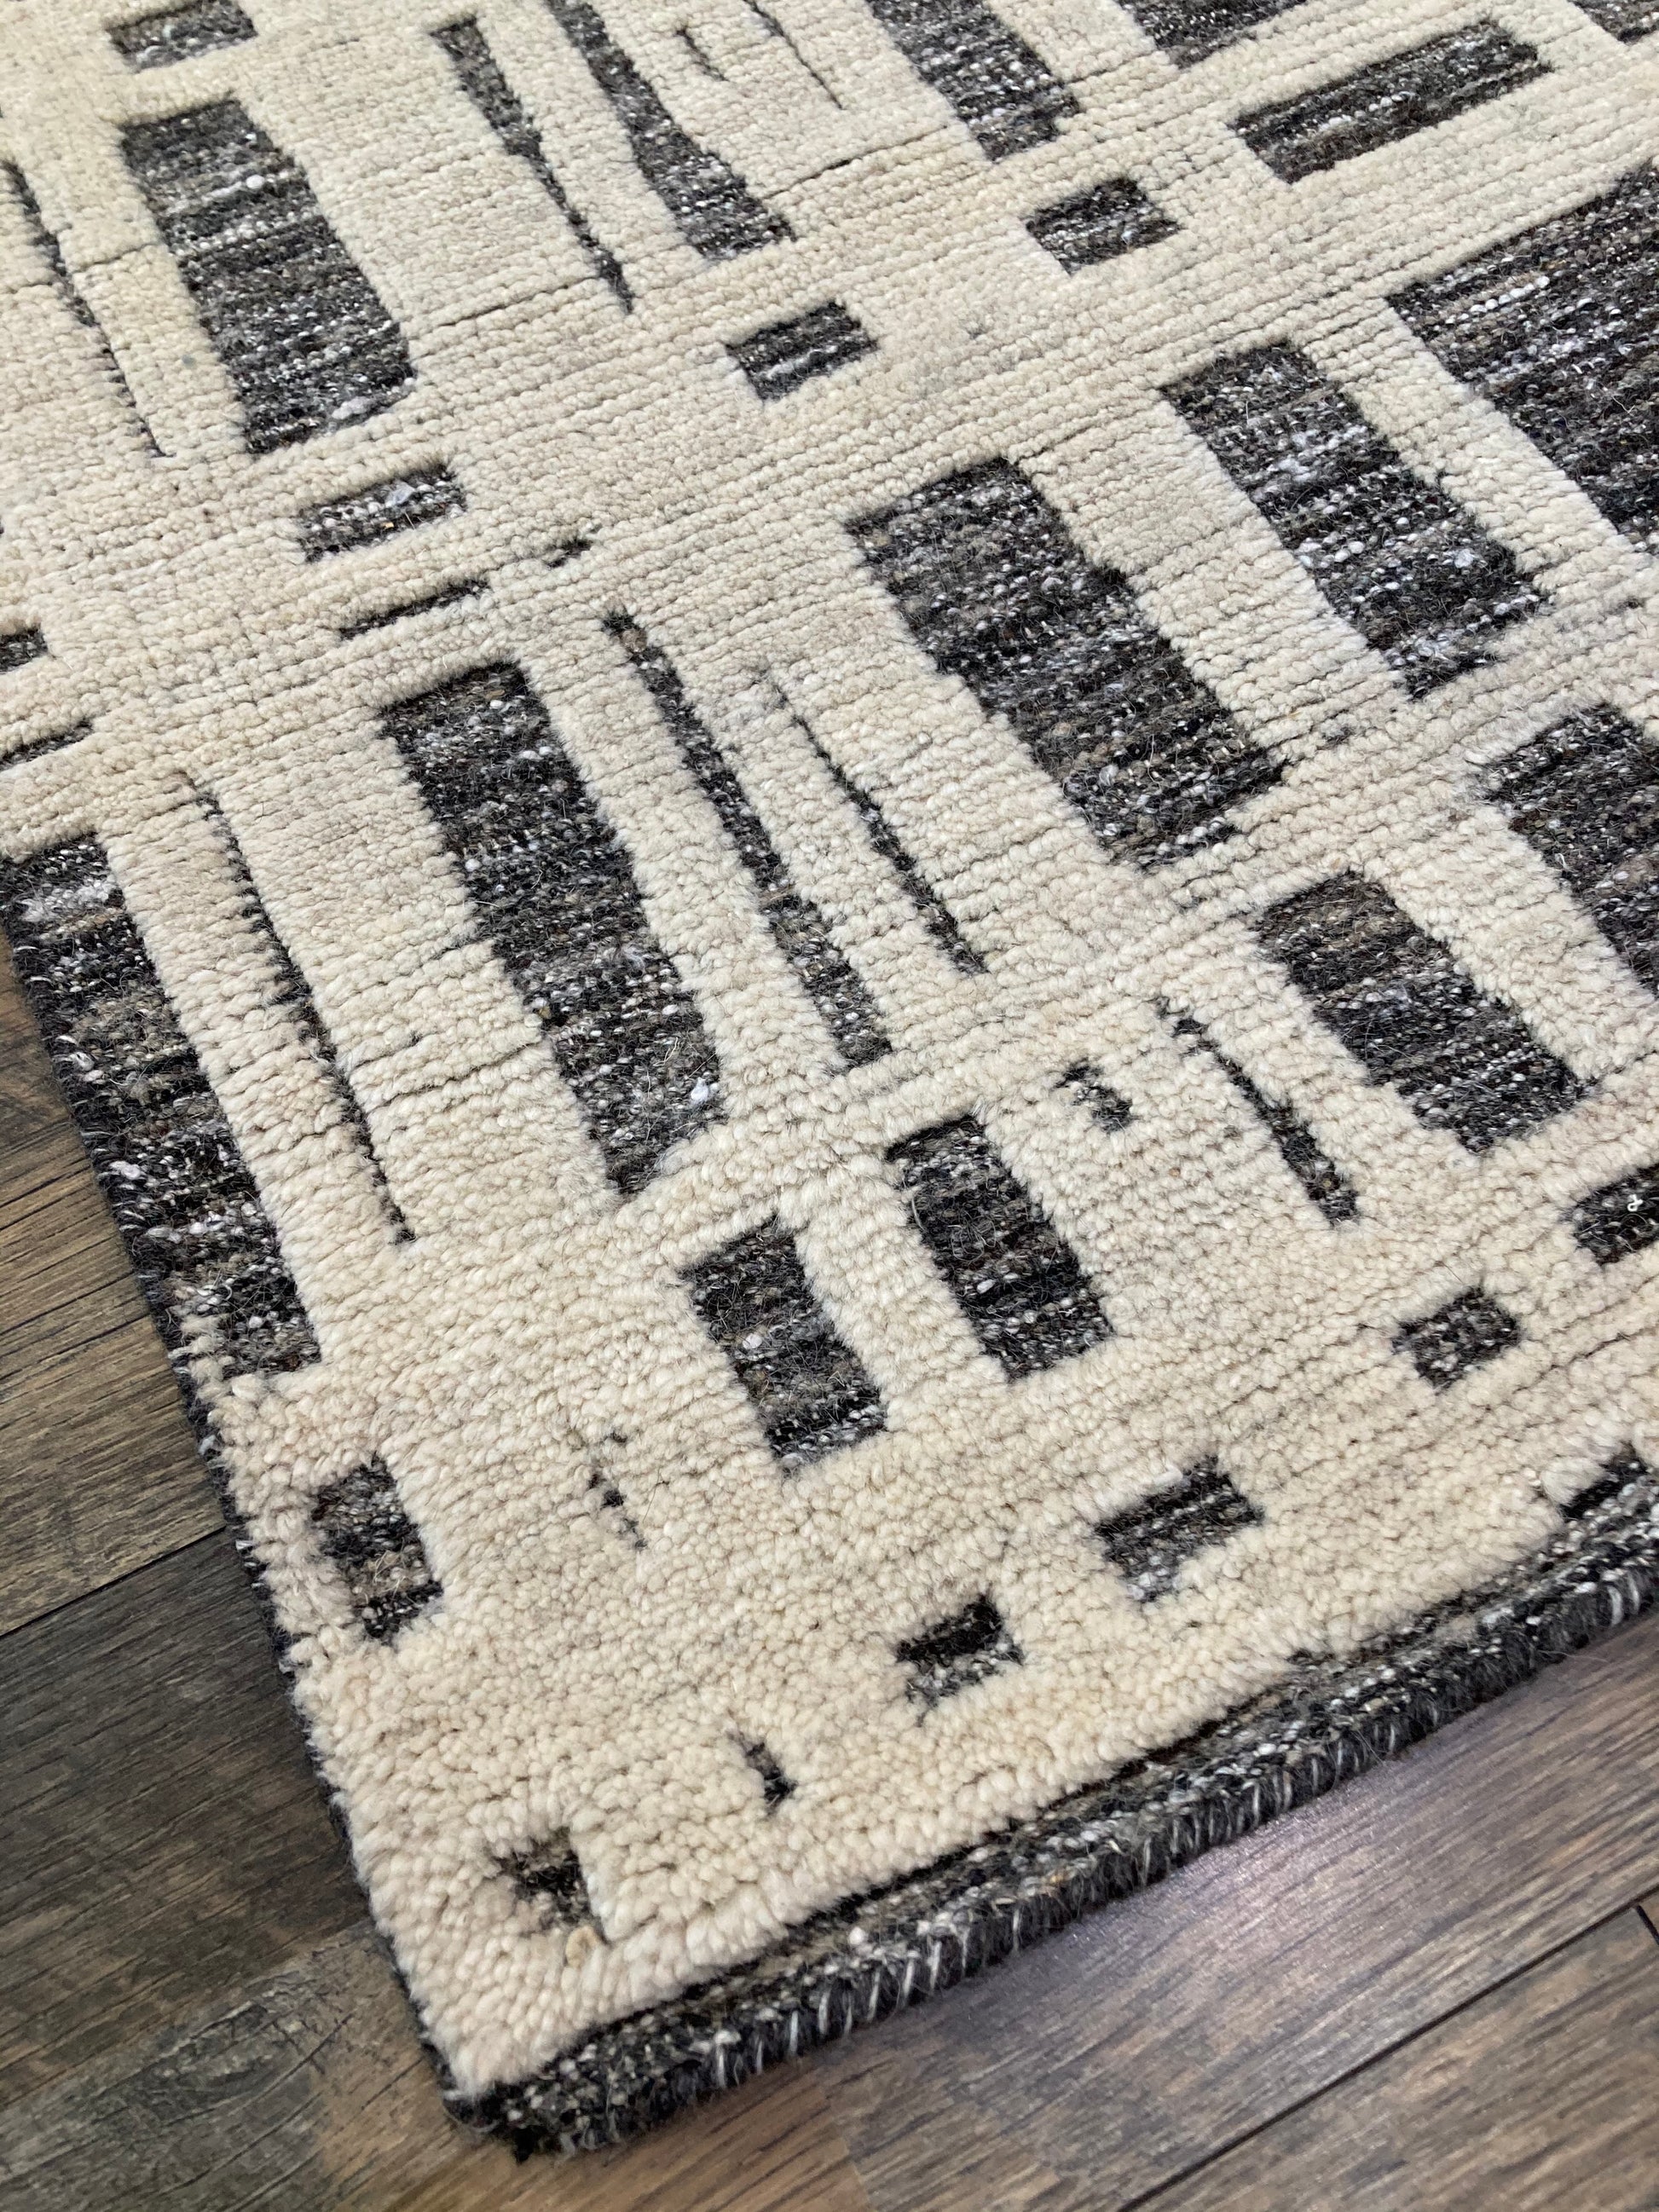 refined carpet rugs high low area rug textured chevron herringbone pattern gray oatmeal area rug online contemporary transitional affordable area rug store online orange county california fountain valley ca 92708 cream charcoal ivory